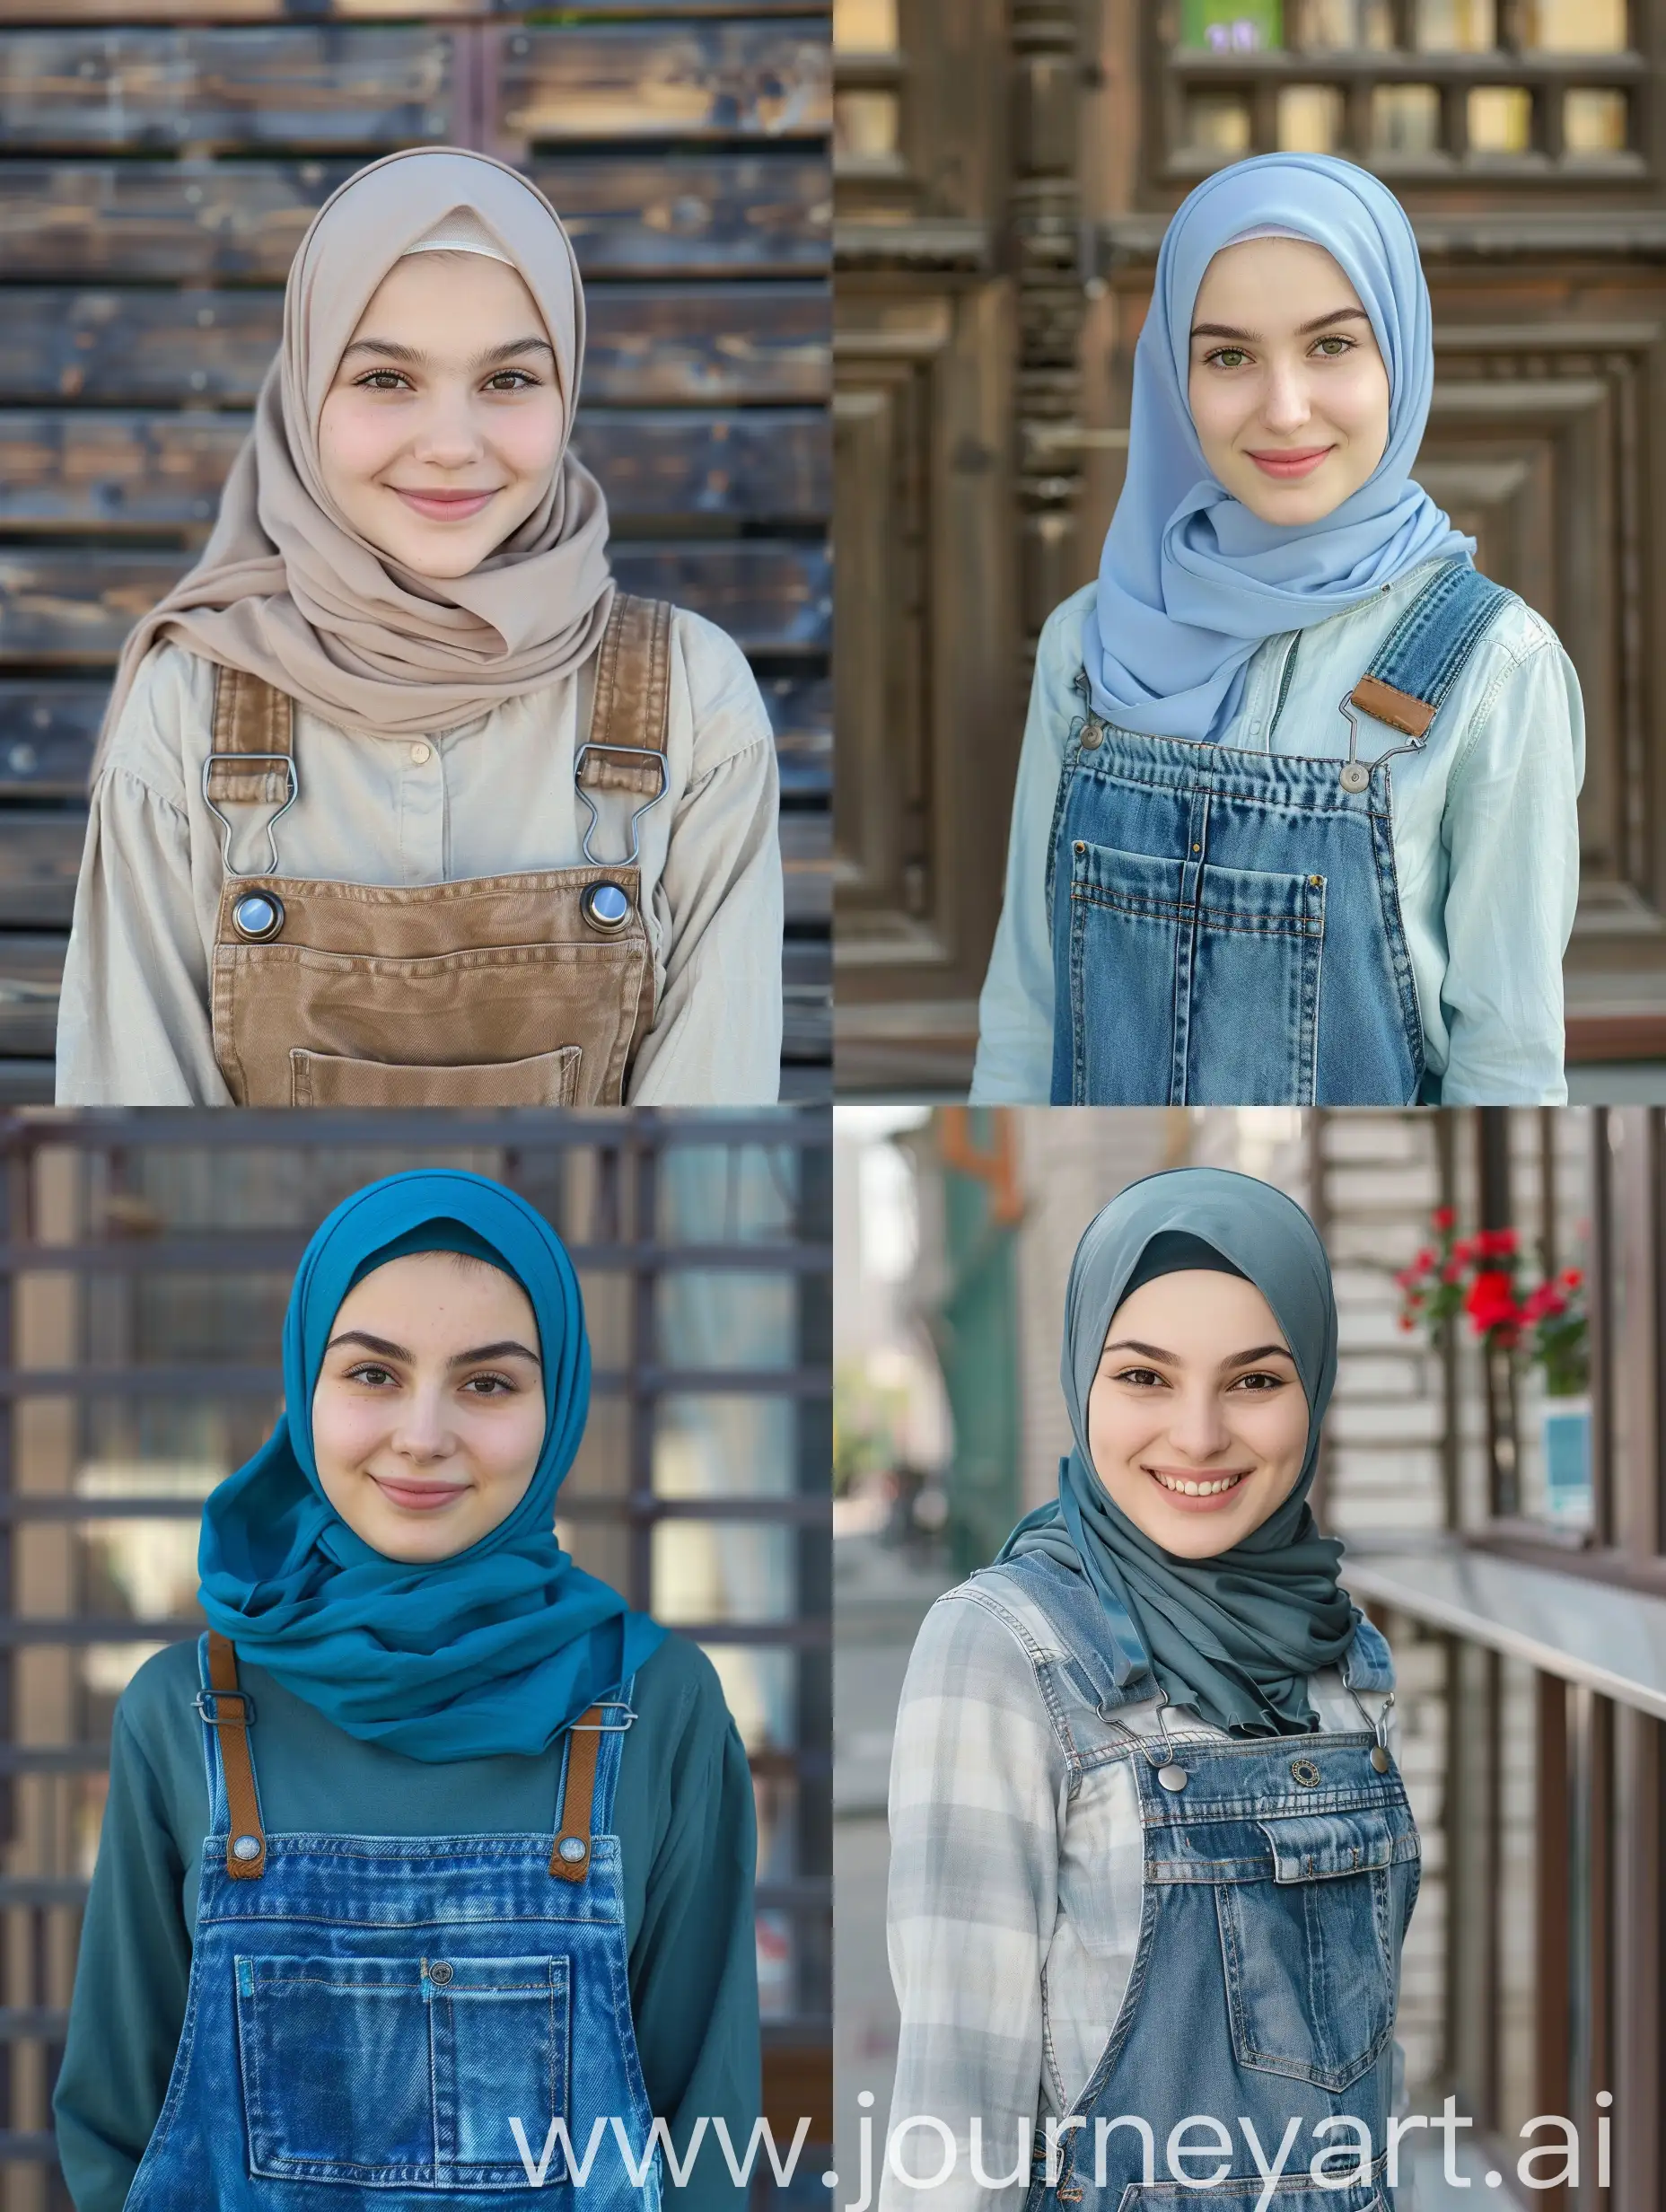 Young-Russian-Hijab-Woman-Smiling-in-Moscow-Overalls-Portrait